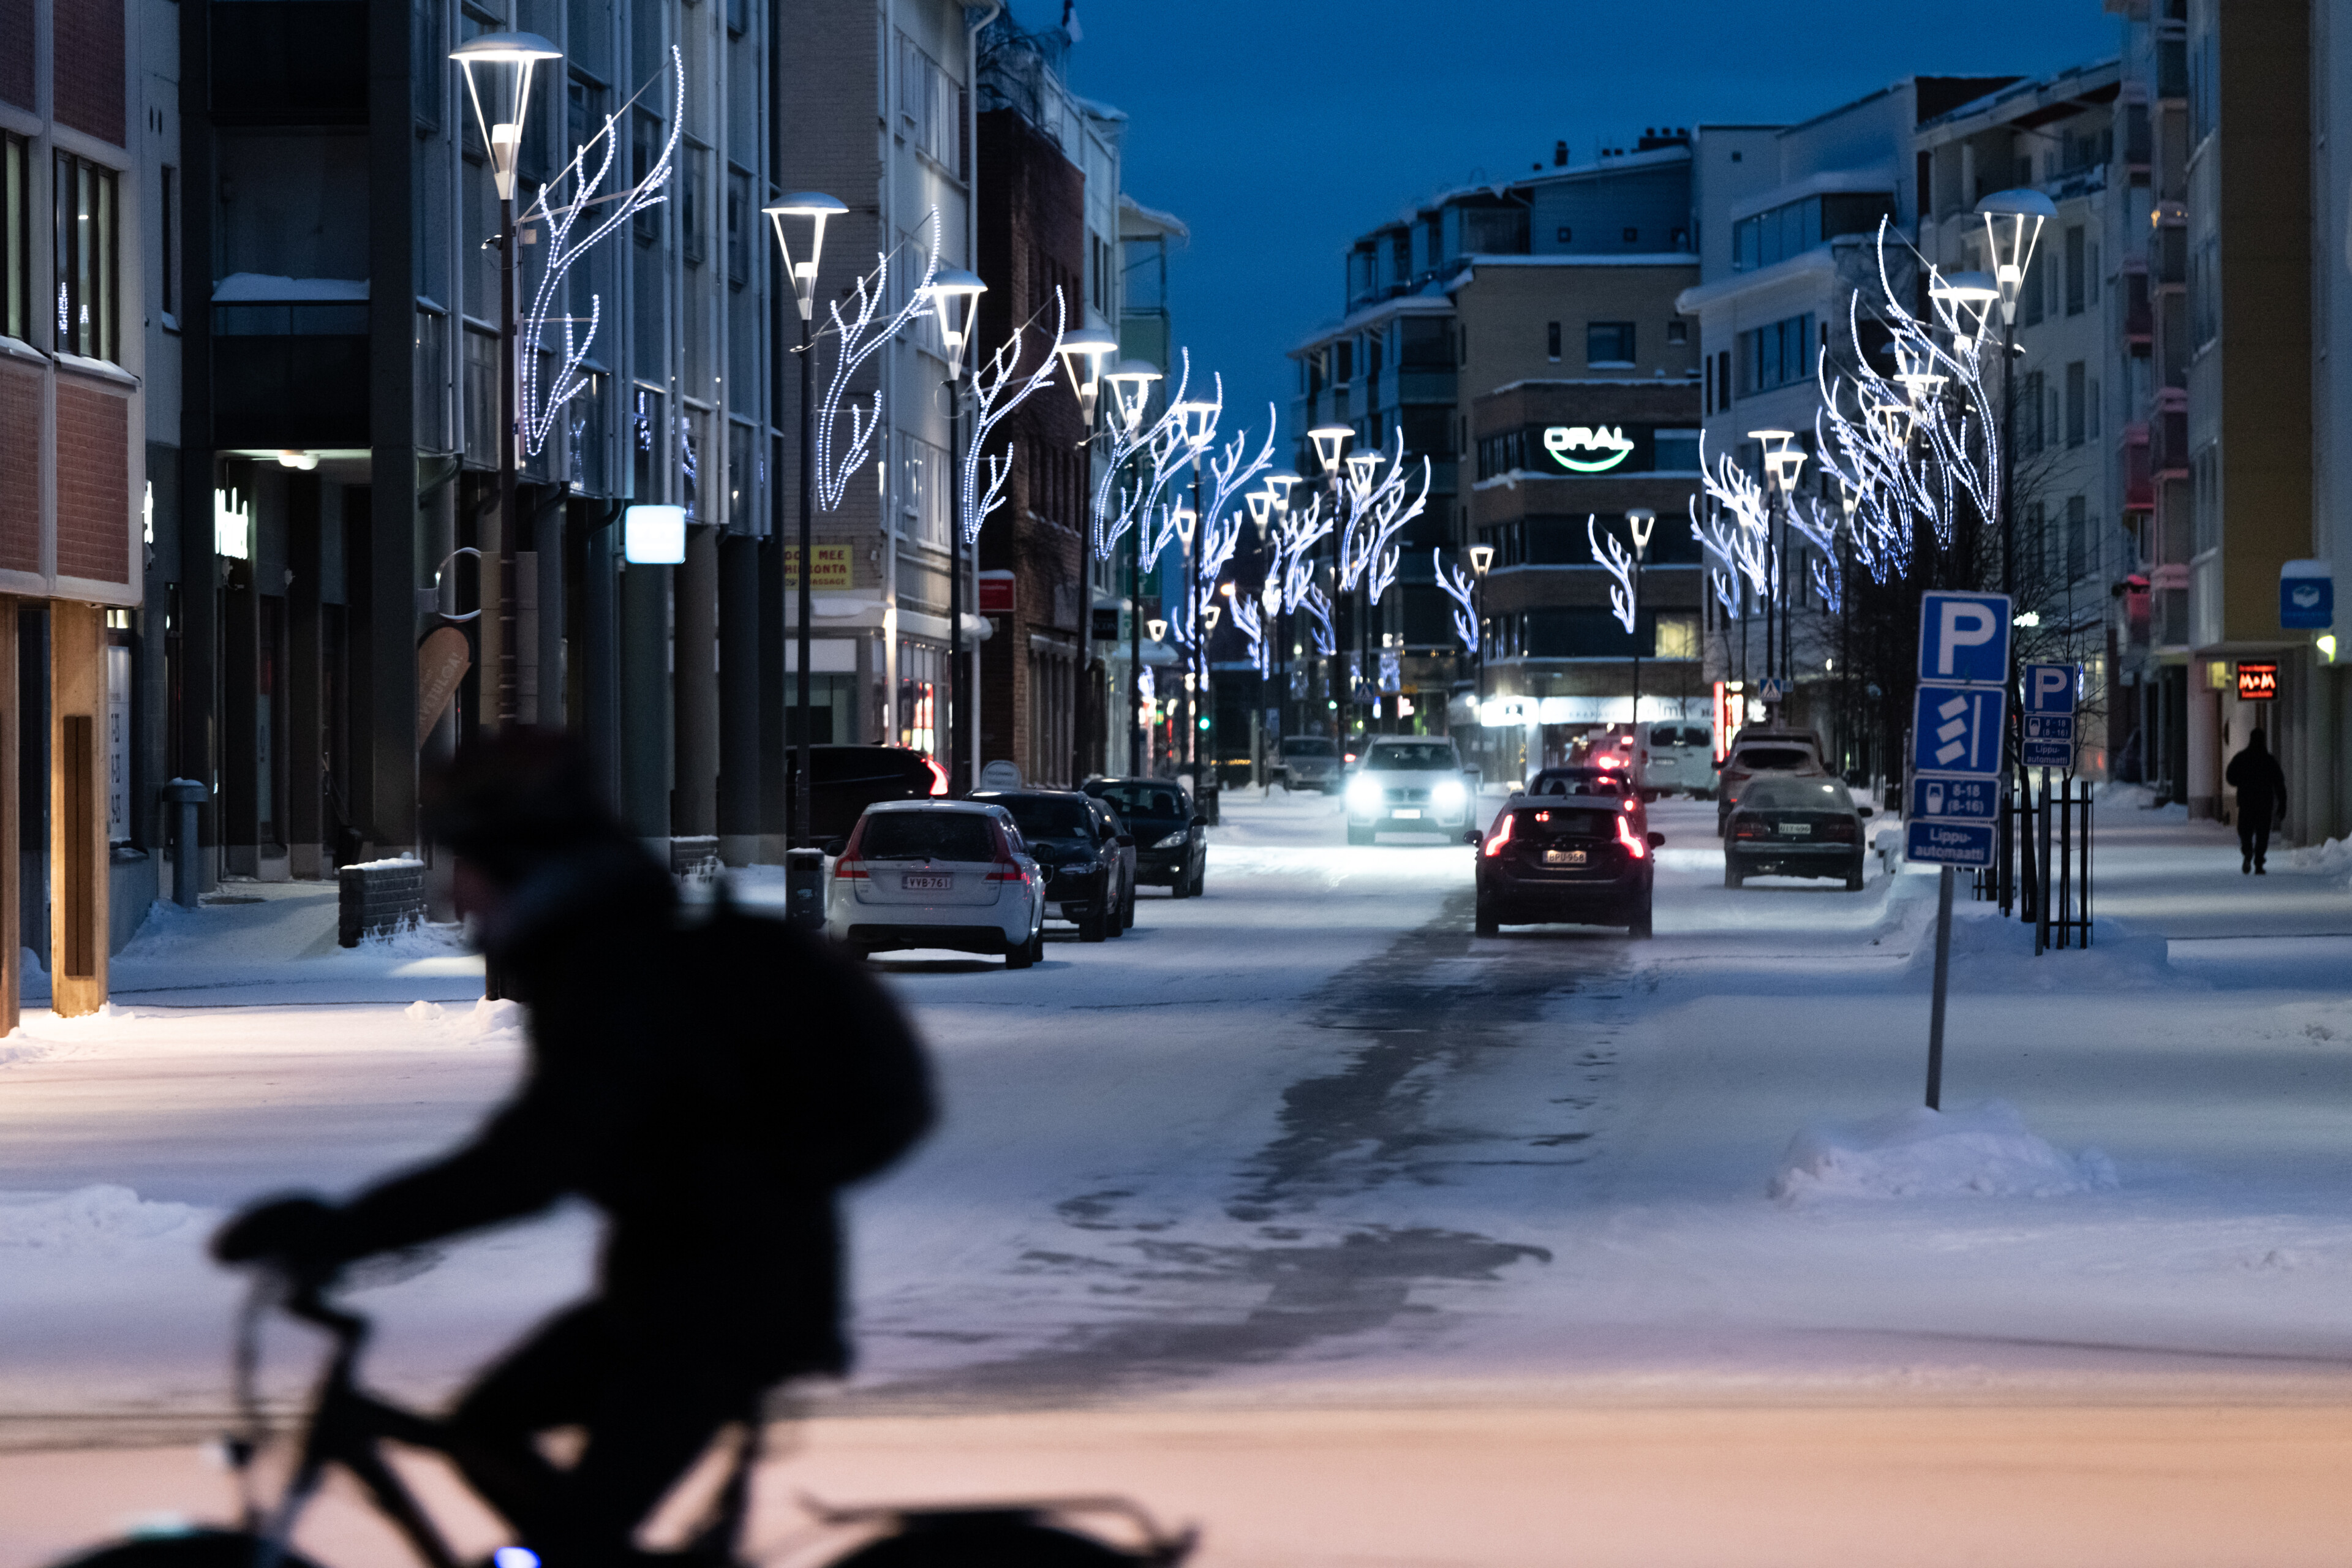 Christmas lights, traffic and snow in Rovaniemi city centre during winter in Lapland, Finland.